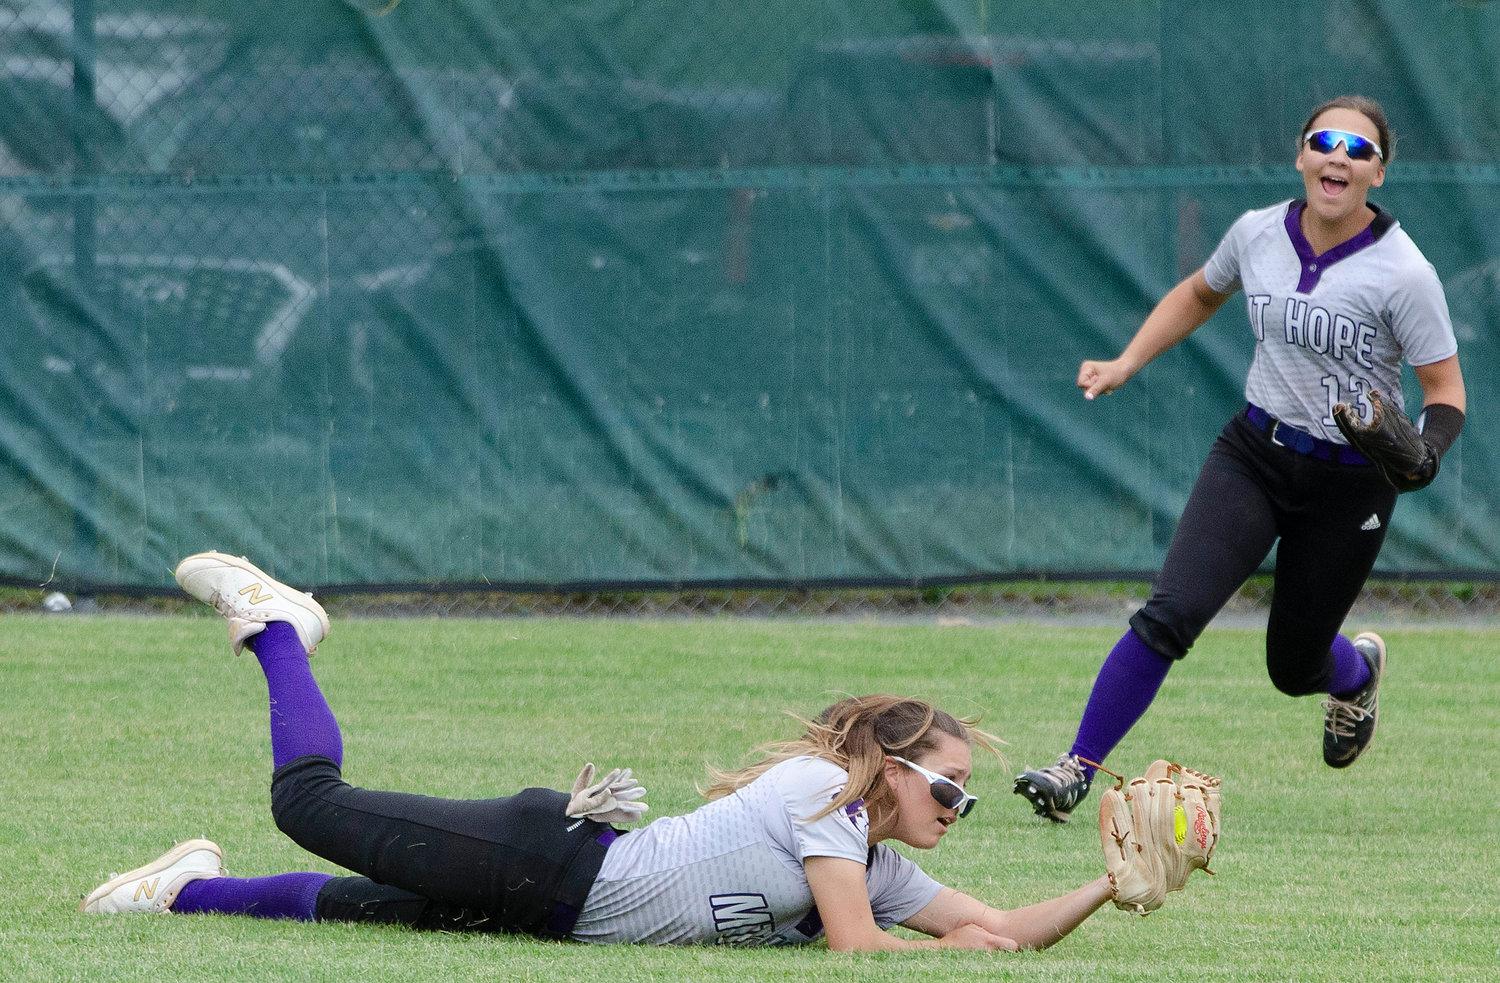 Logan Levesque looks on as Huskies centerfielder Jayda Sylvia makes a diving catch to steal a lead off hit from Prout three hitter Alivia Ring in the third inning.